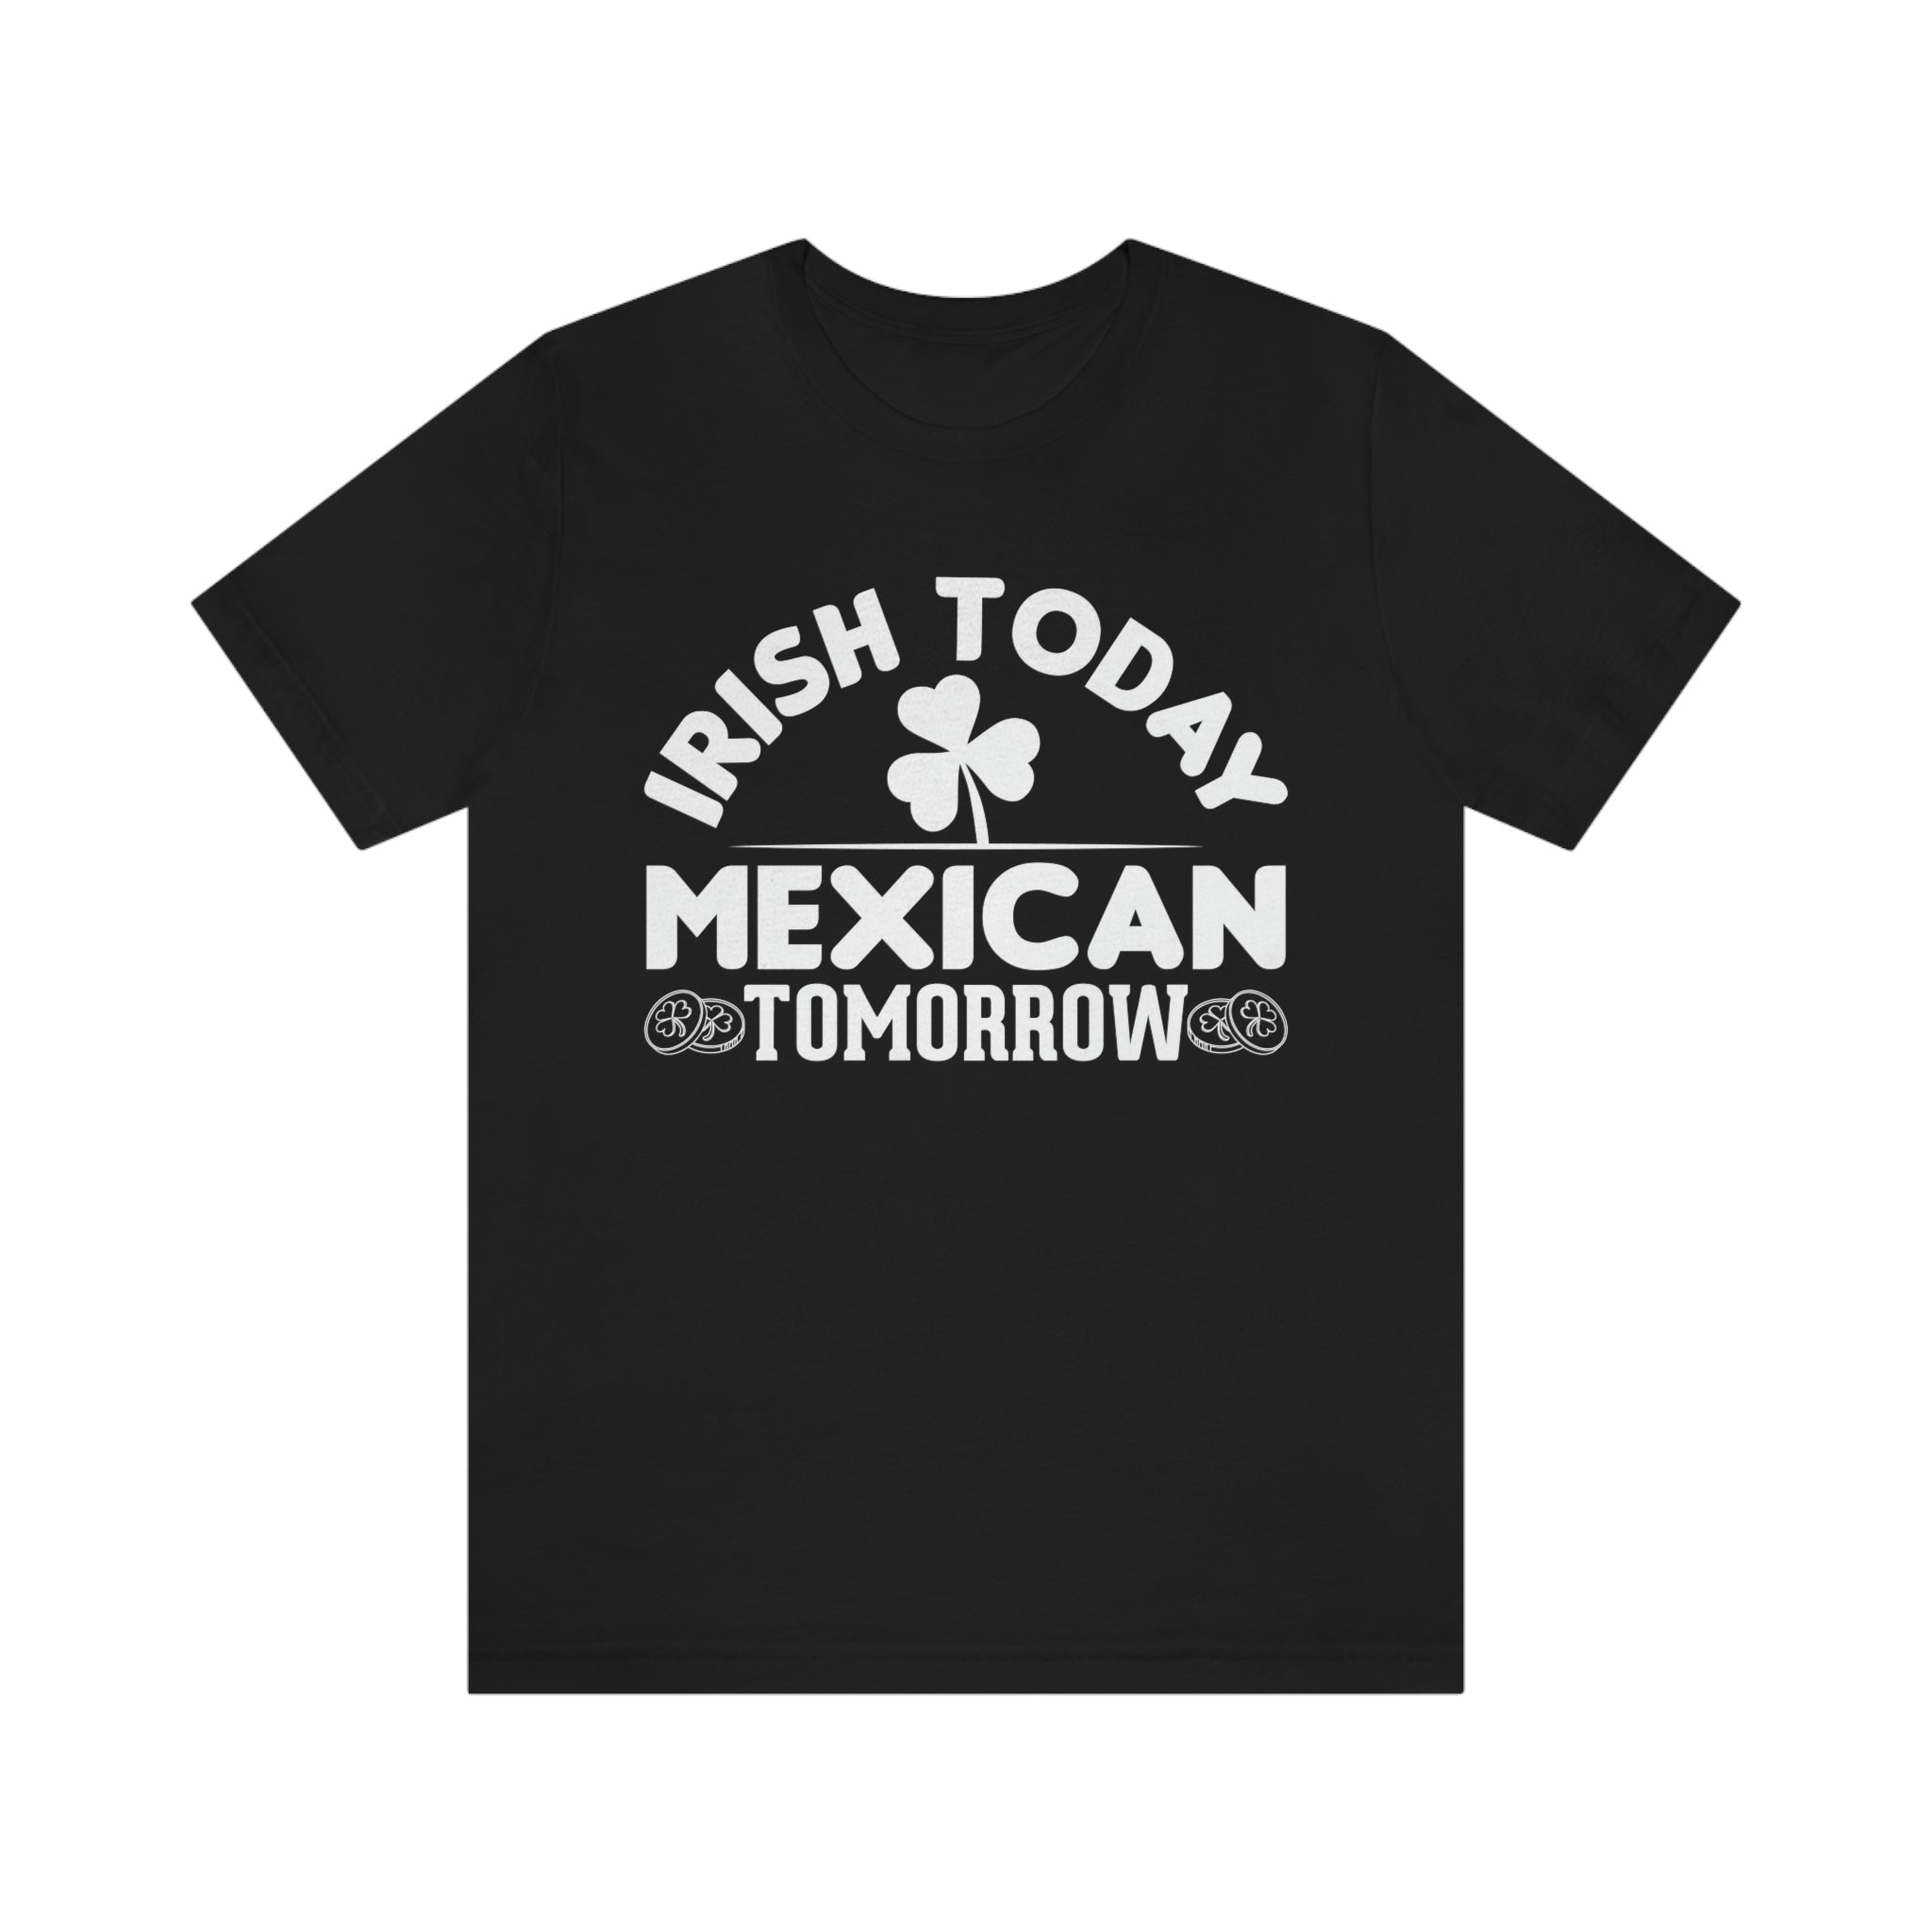 Humorous take on St. Patrick's Day for Mexican men with t-shirt reading 'Irish Today, Mexican Tomorrow'